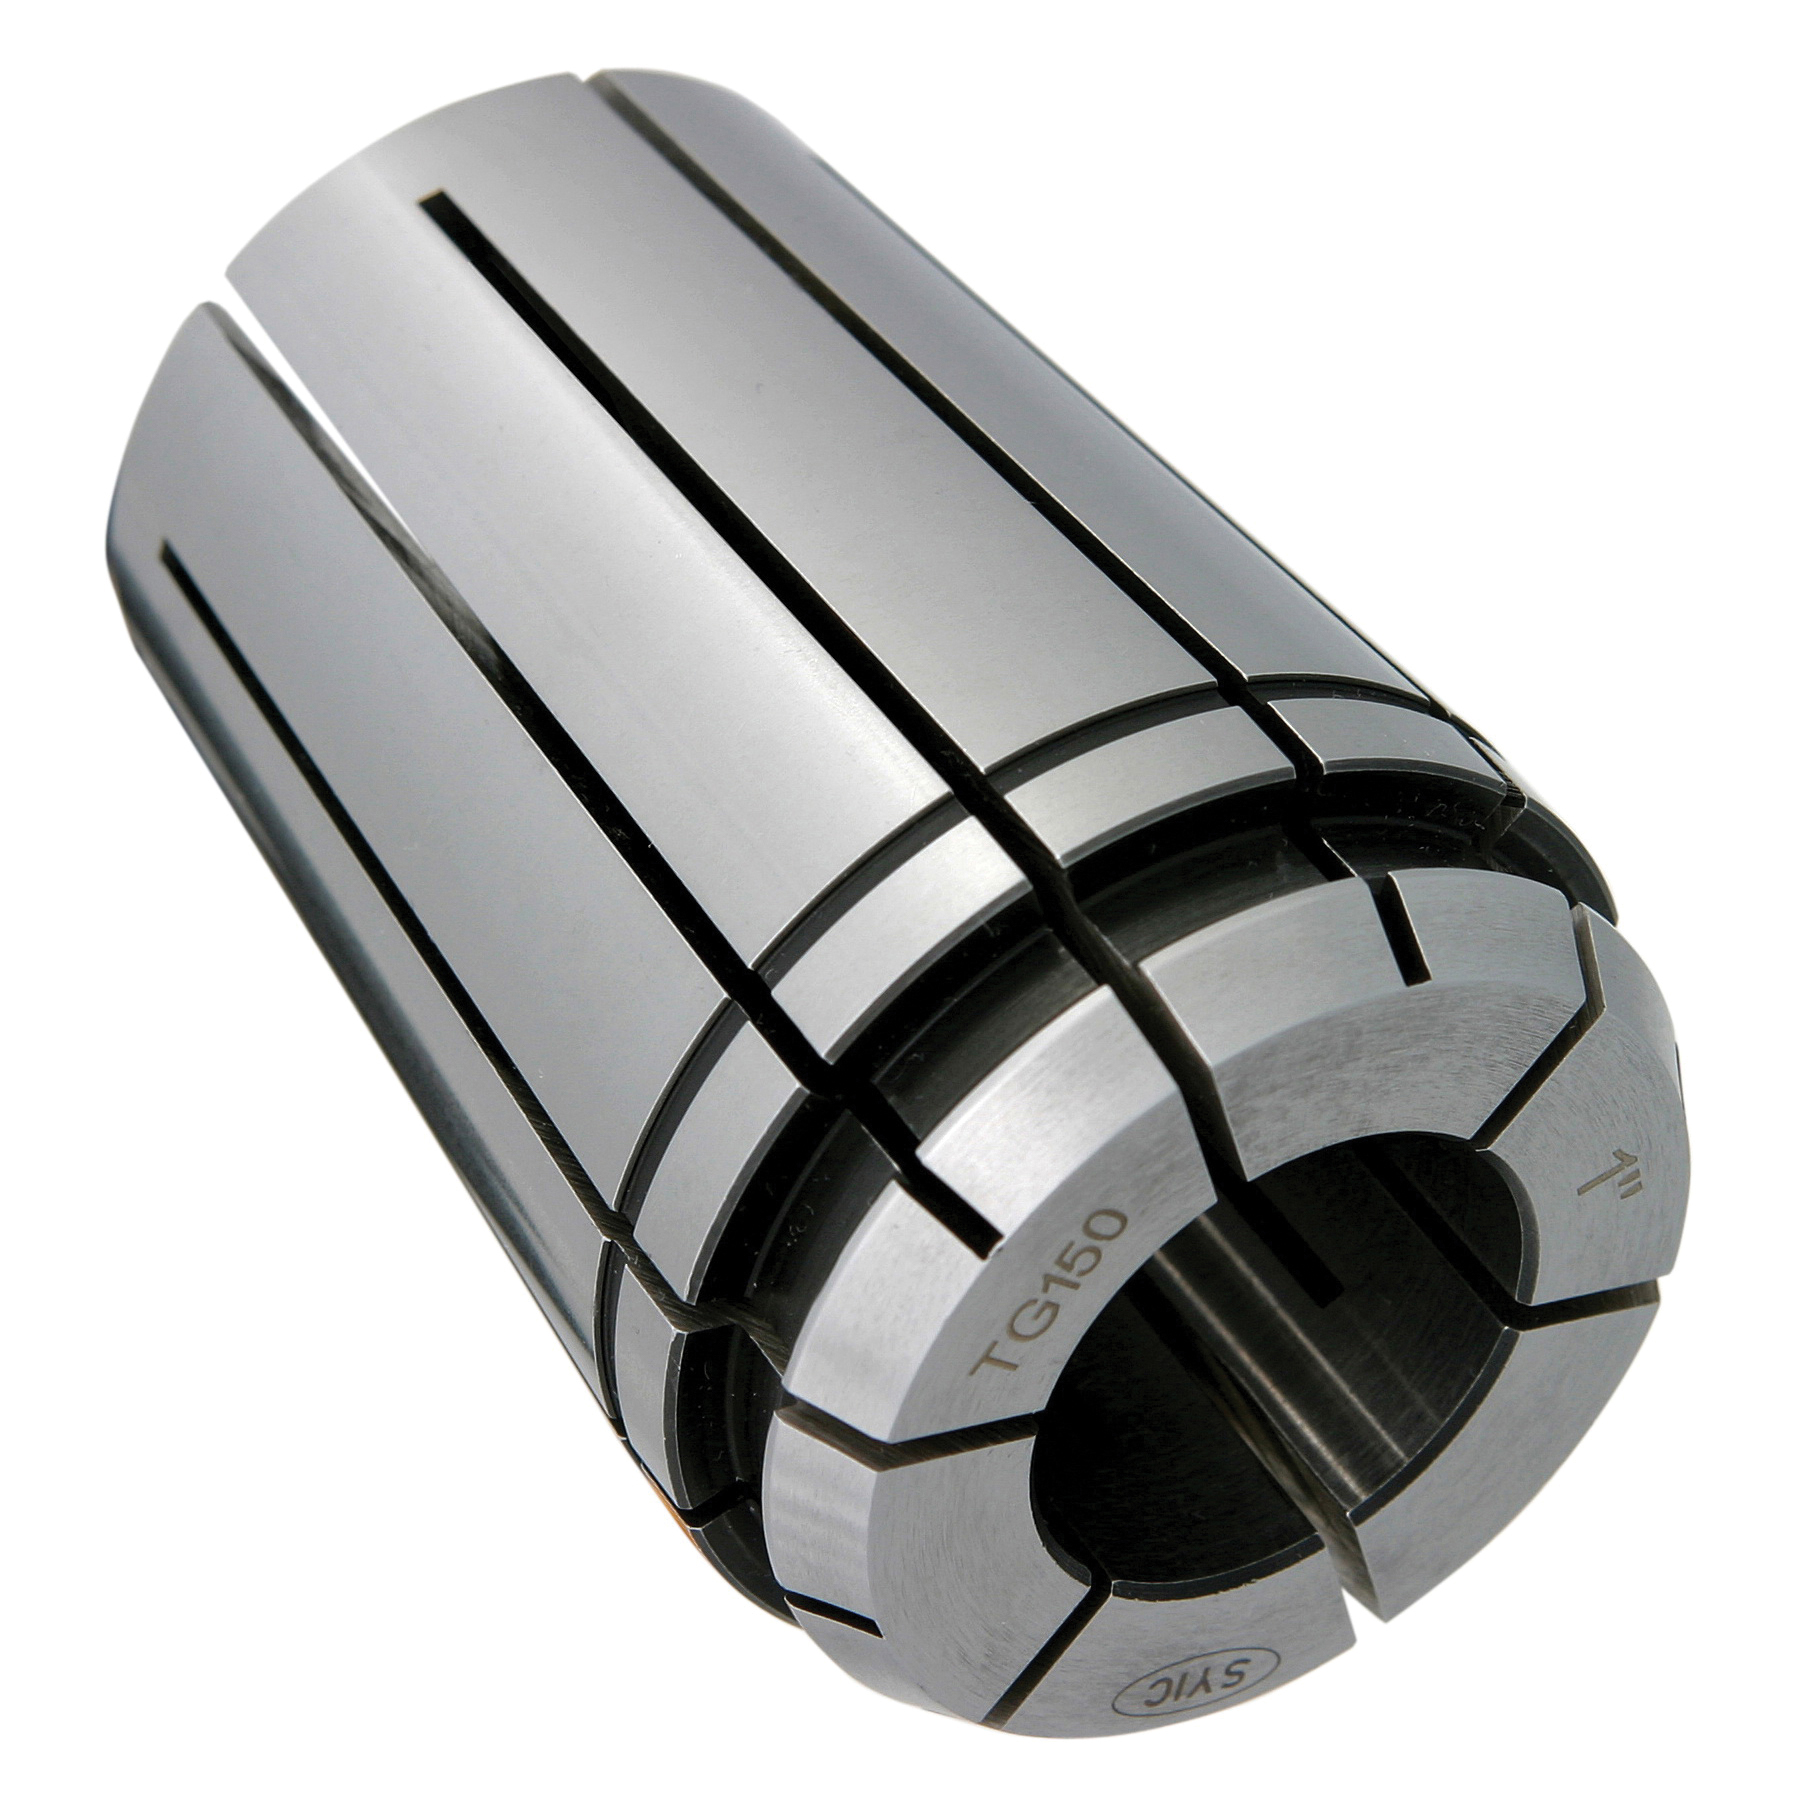 TG150 1-3/16" COLLET